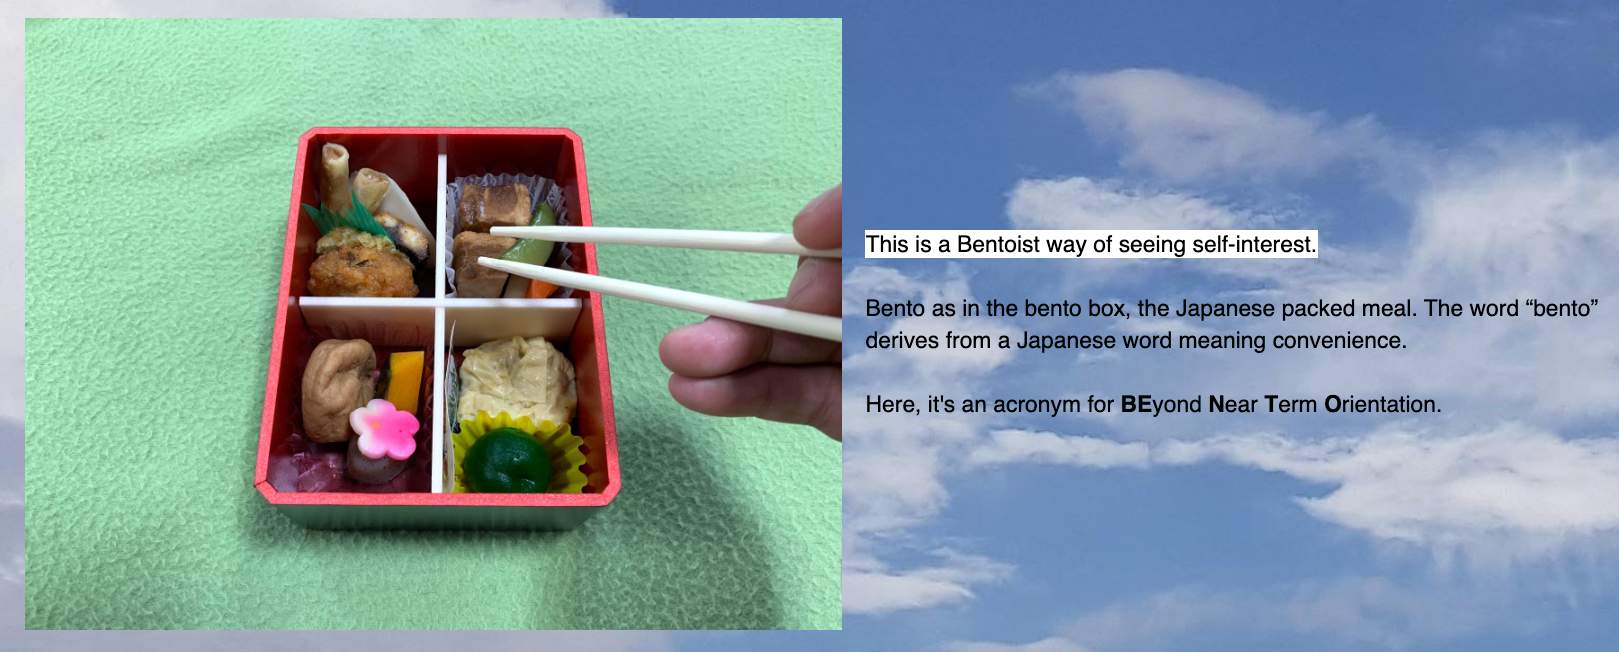 The Bentoist way of seeing self-interest: Bento as in the bento box, the Japanese packed meal. The word "bento" derives from a Japanese word meaning convenience. Here, it's an acronym for BEyond Near Term Orientation.